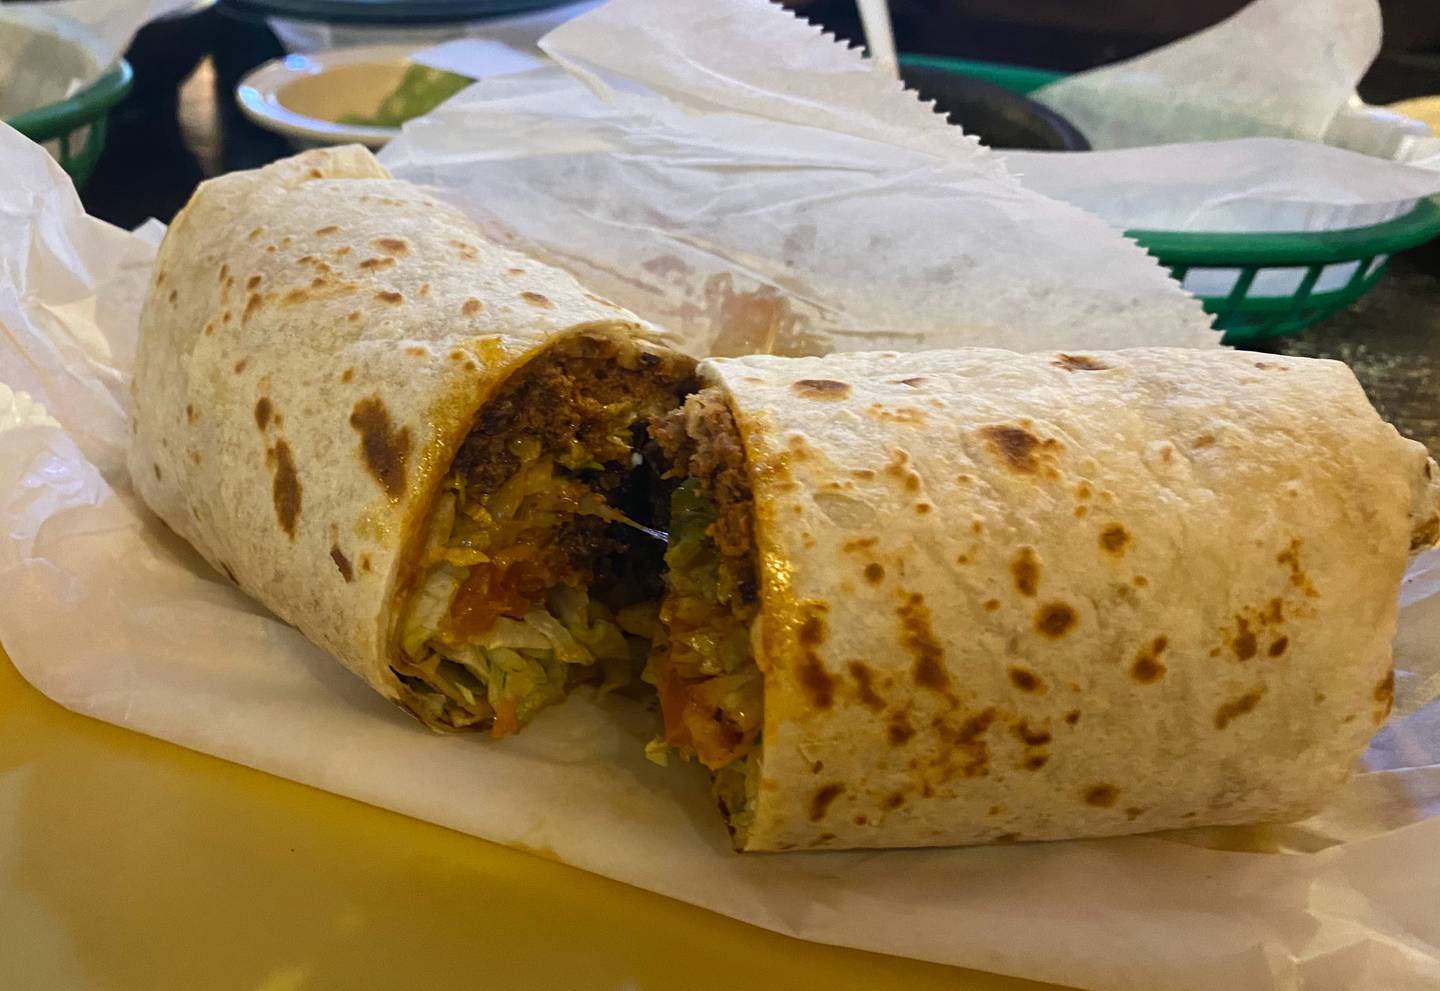 I ordered the chorizo burrito ($8.99), which came with beans, cheese, lettuce, tomato, onion and sour cream, at the Taqueria Las Cumbres in Crystal Lake.